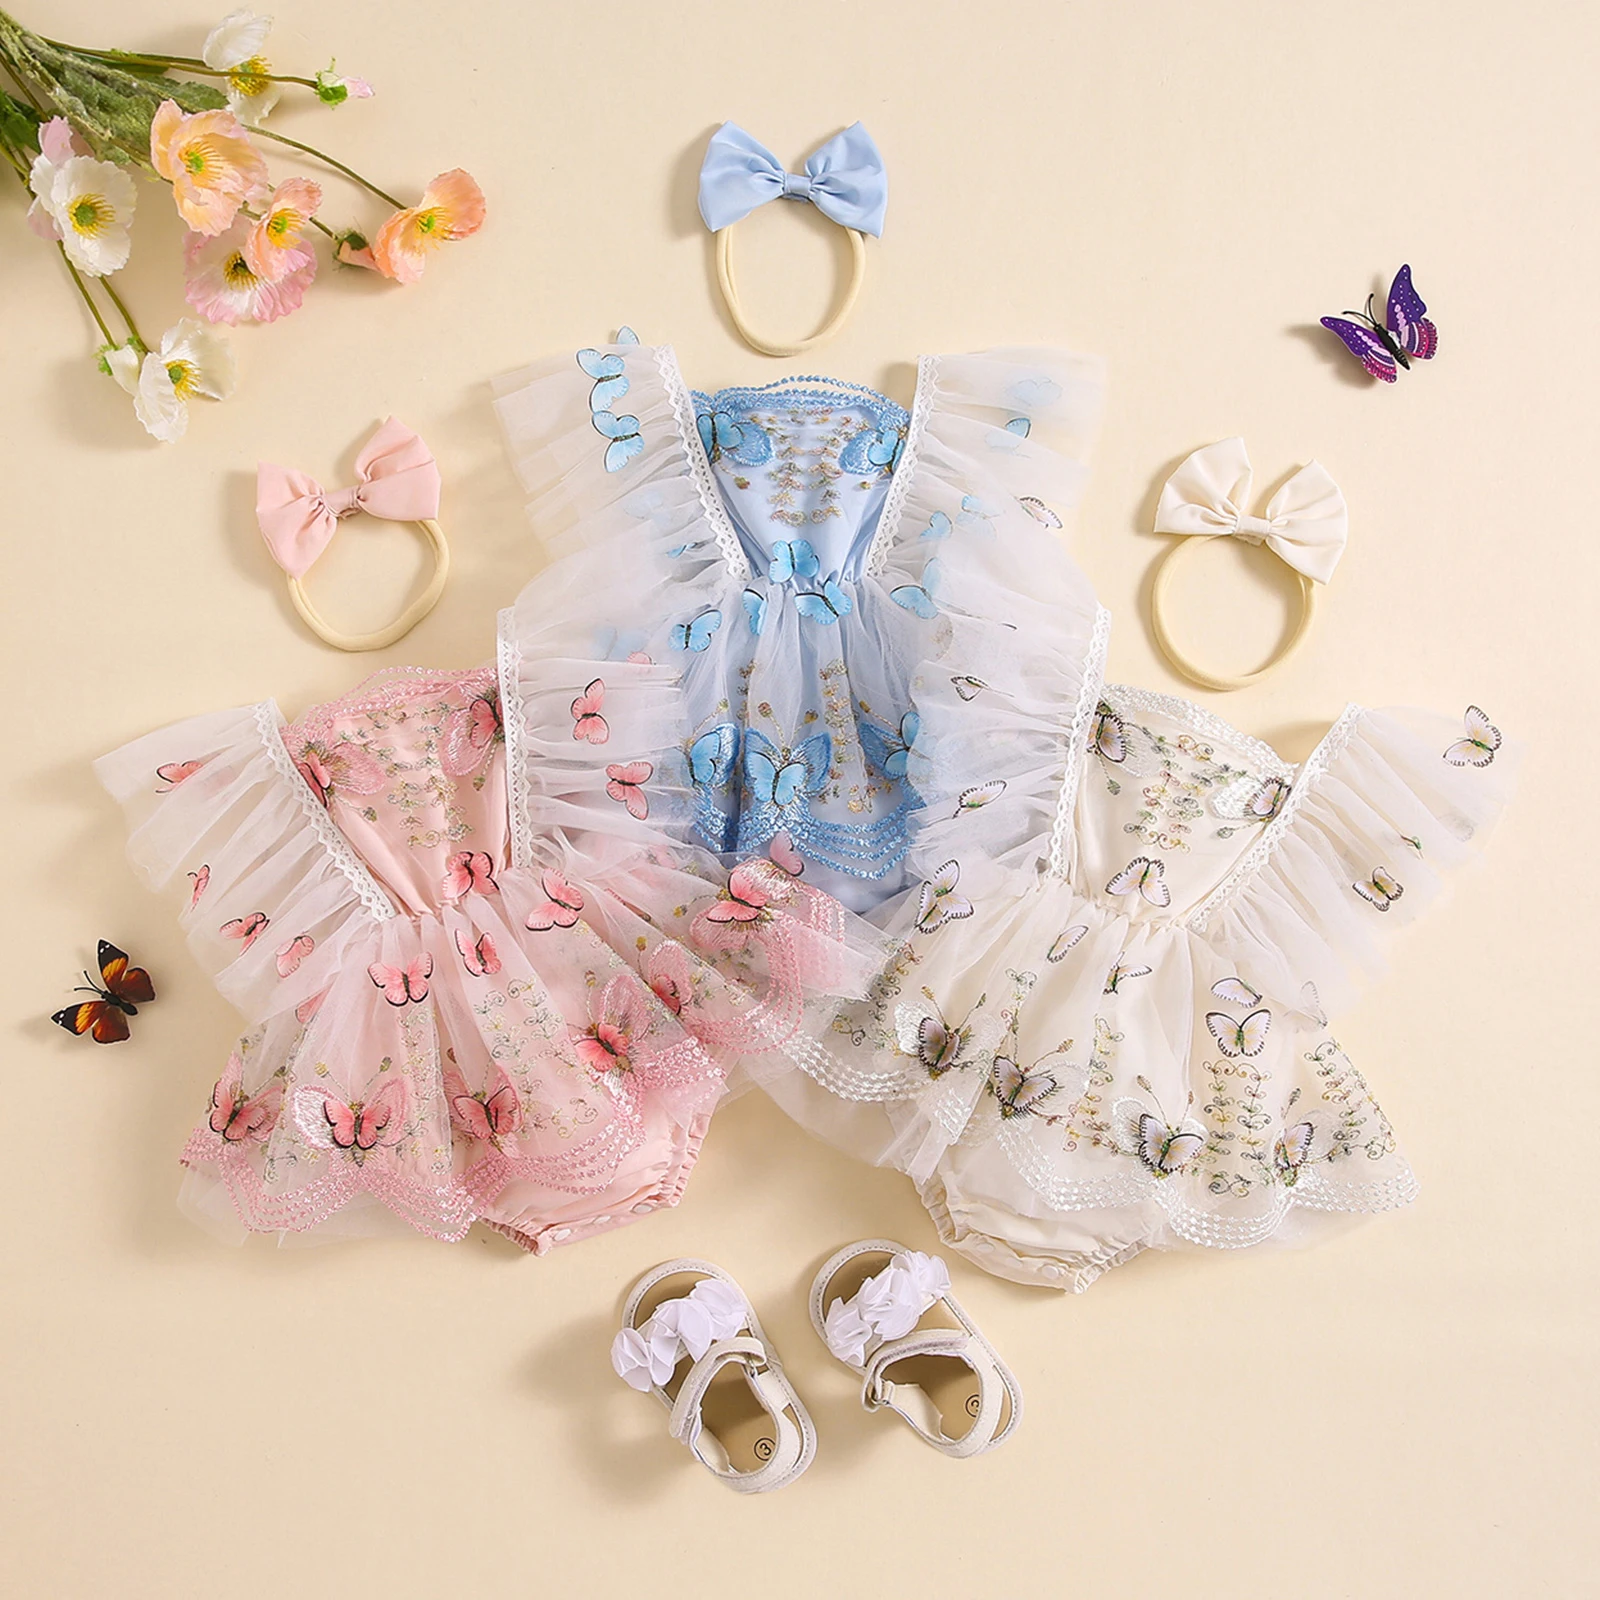 

Baby Girls Rompers Dress Lace Trim Butterfly Pattern Embroidered Fly Sleeve Tulle Skirt Hem Bodysuits Clothes with Headband